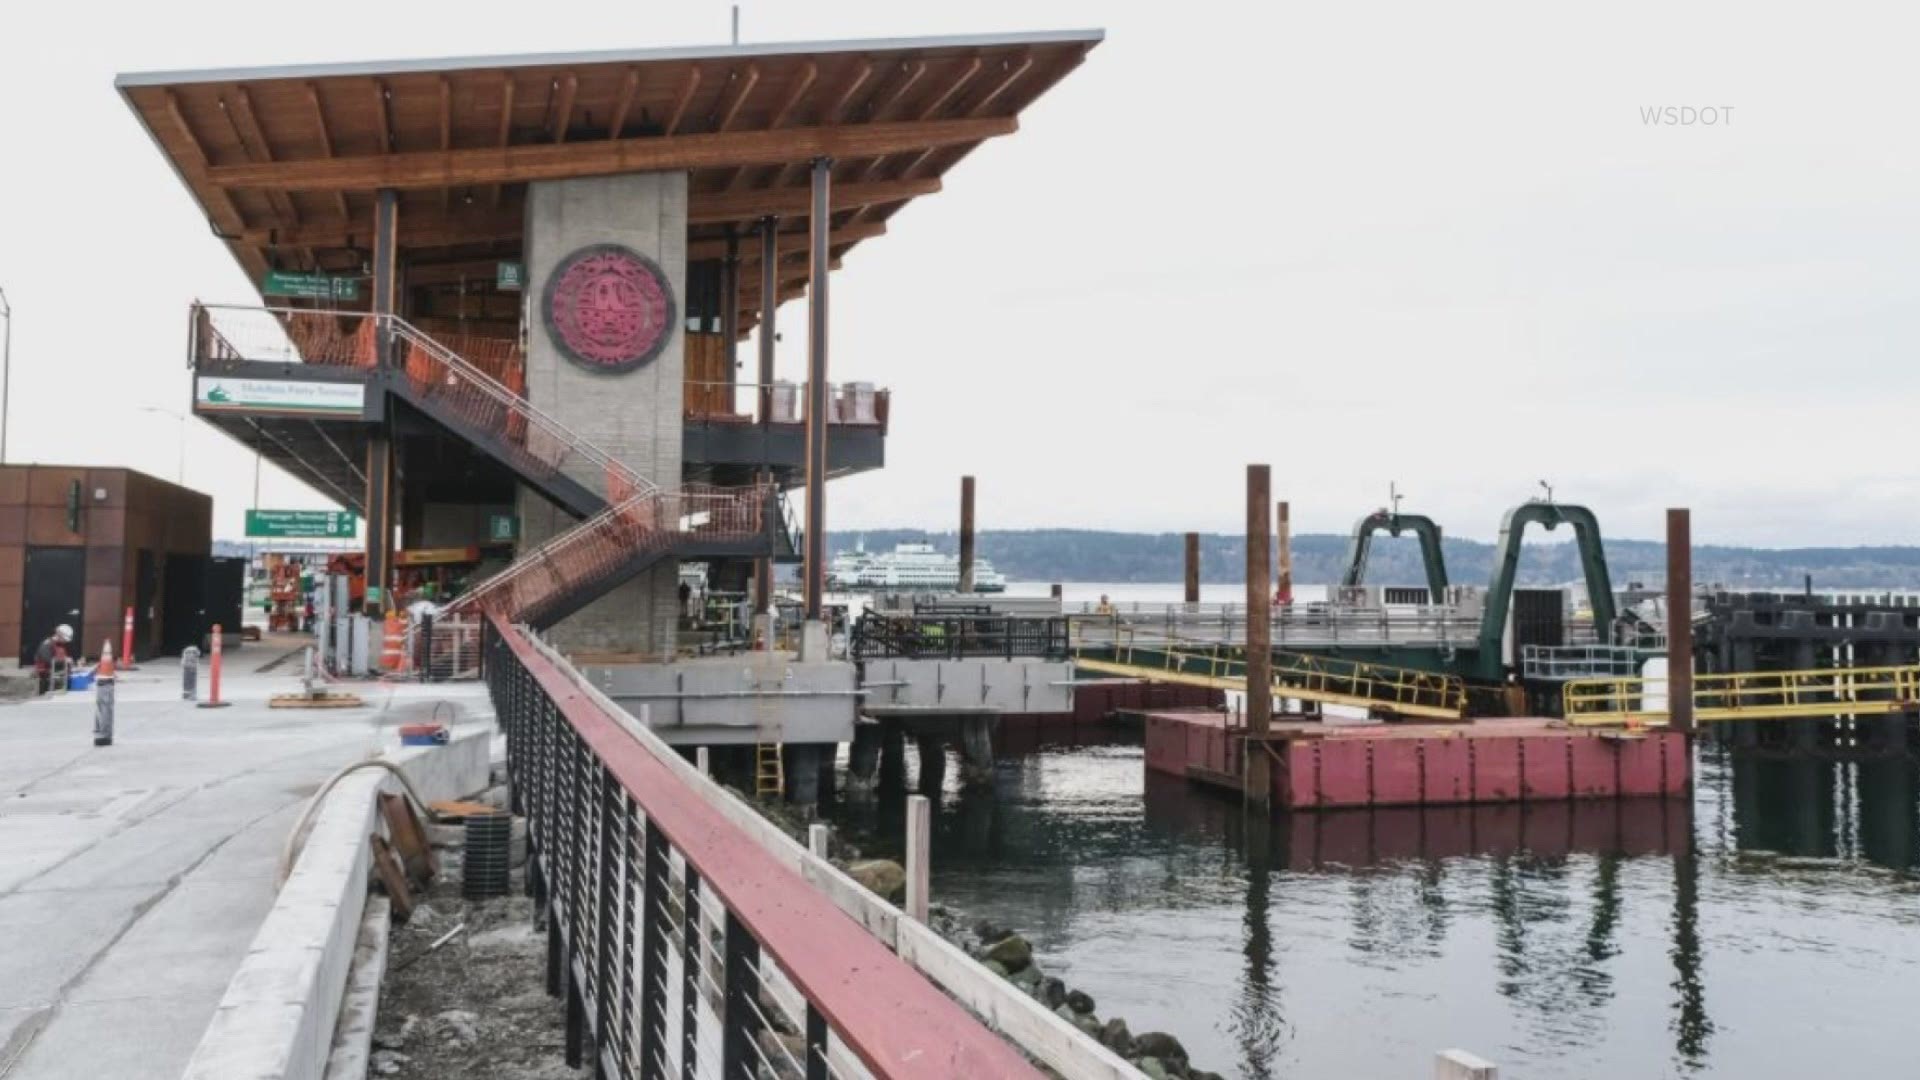 The project to re-do the state's busiest ferry dock has been 20 years in the making.